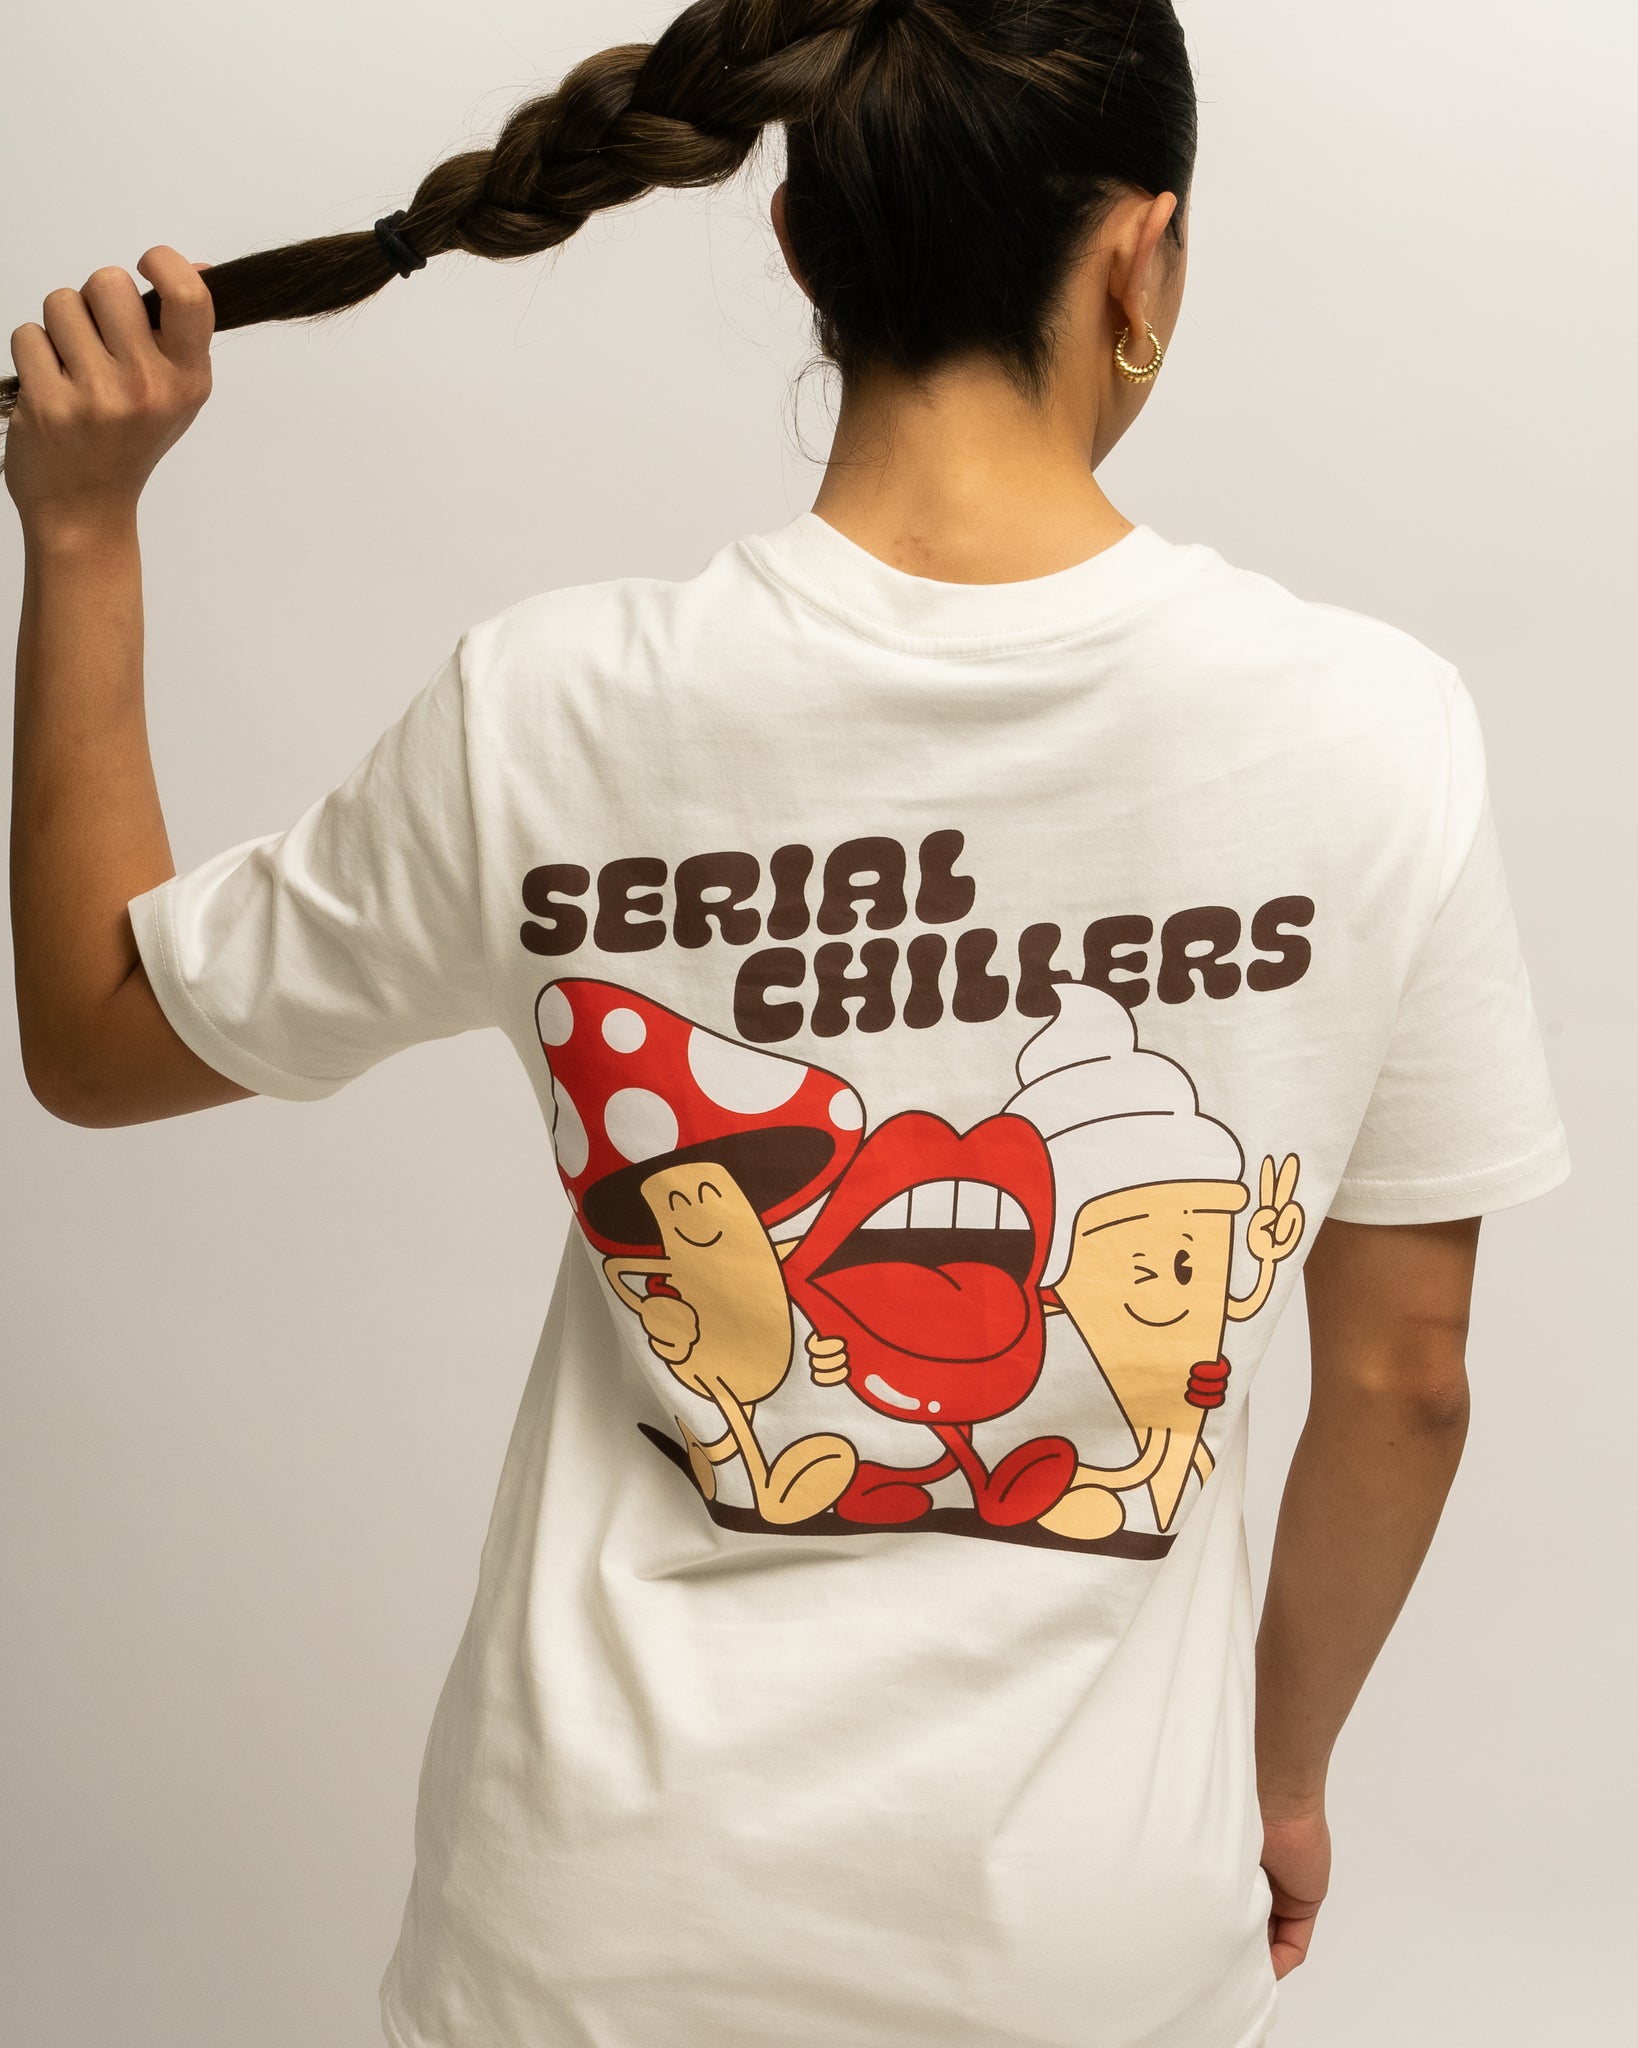 Serial Chillers Tee - Cream